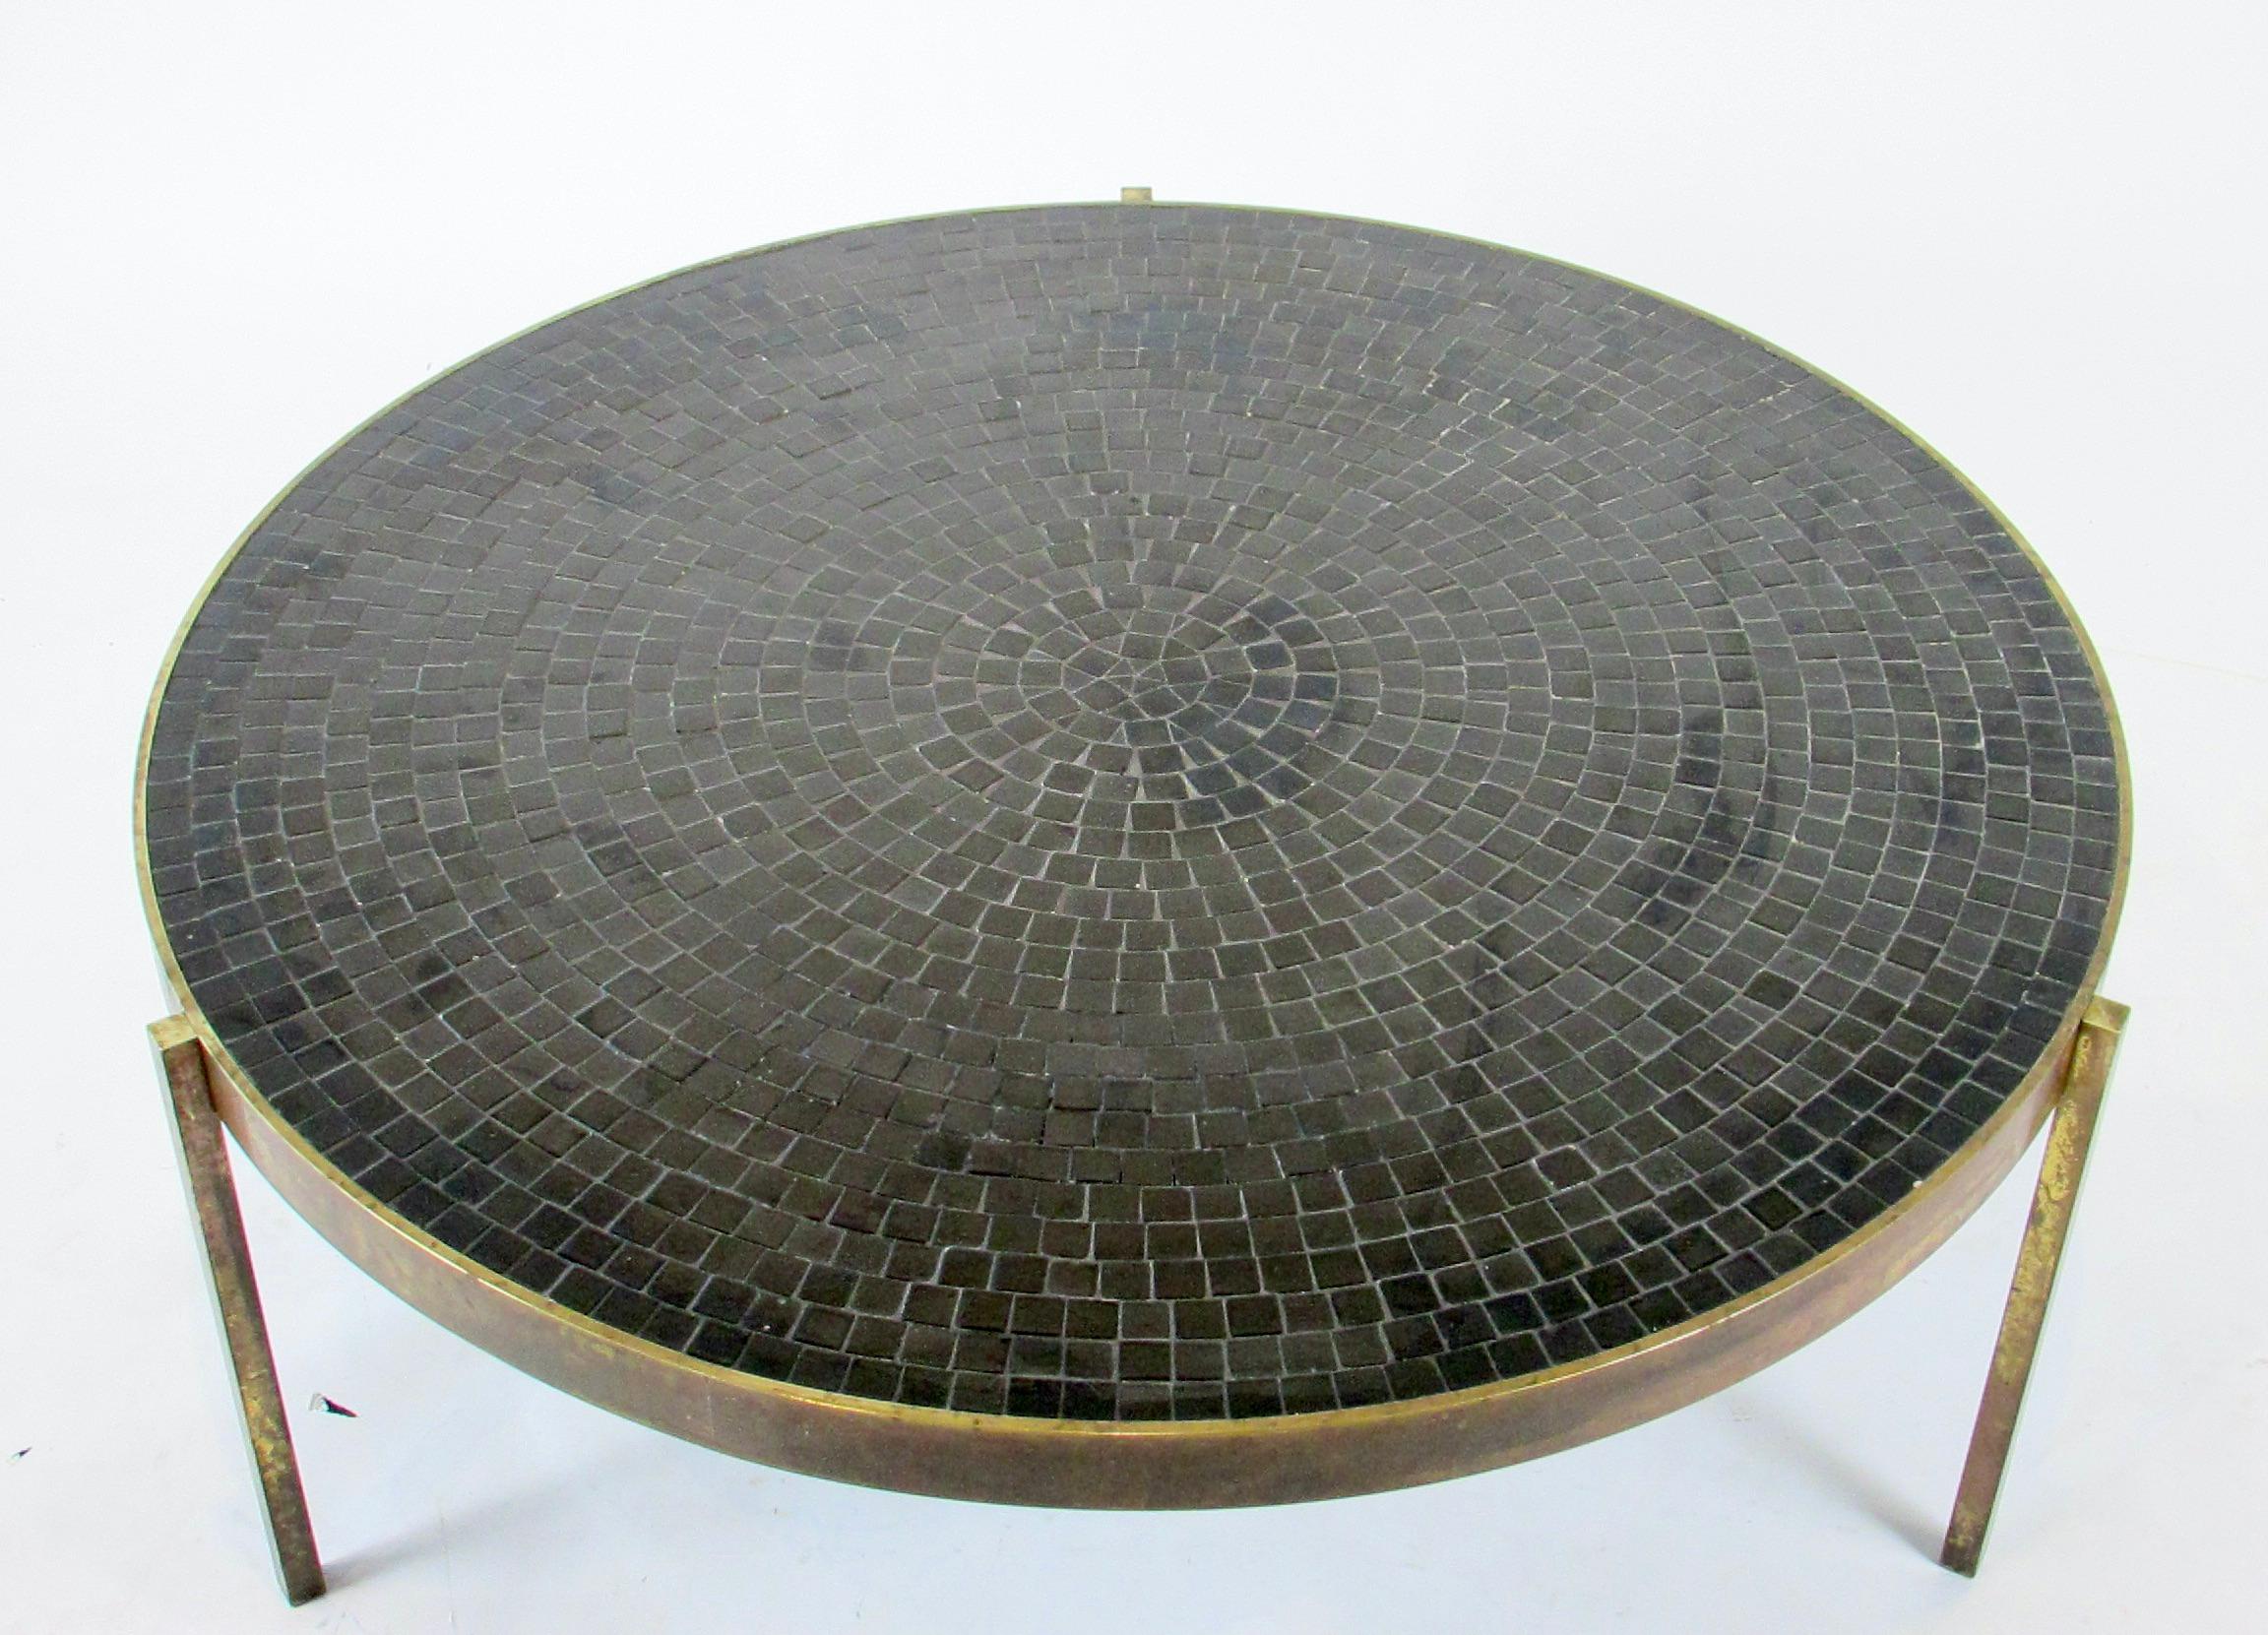 Black ceramic tiles set in a concentric design set in an inch and a quarter wide bronze band. All supported on three. 75